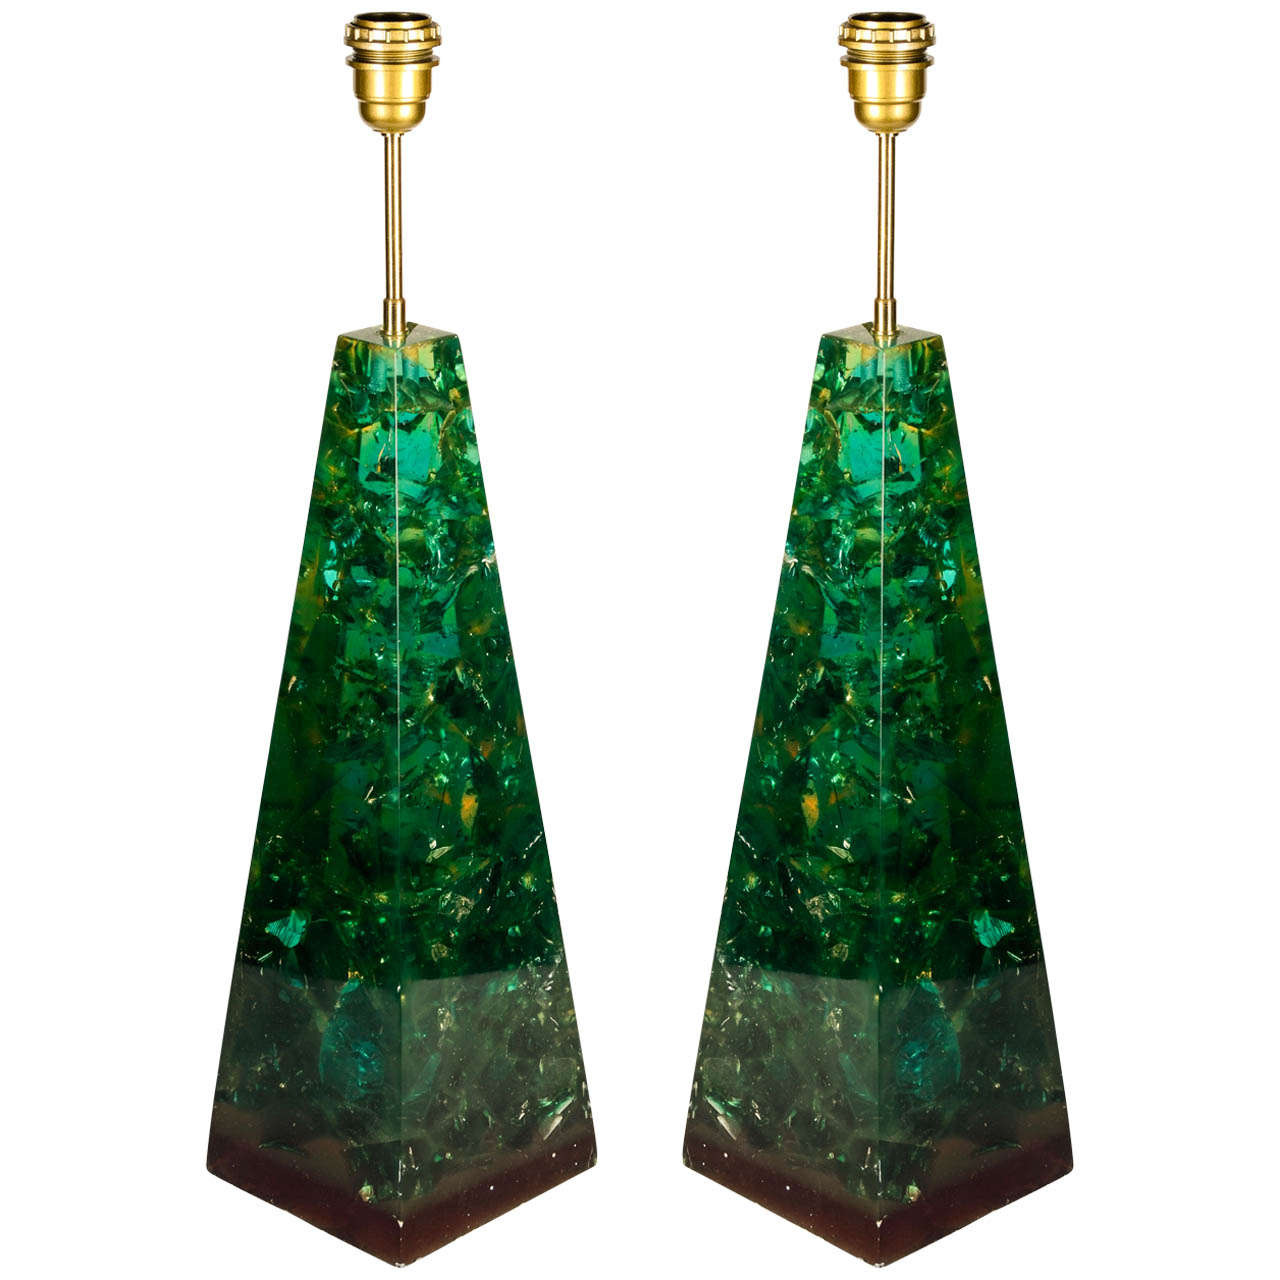 Pair of Resin Table Lamps by Marie Claude de Fouquieres